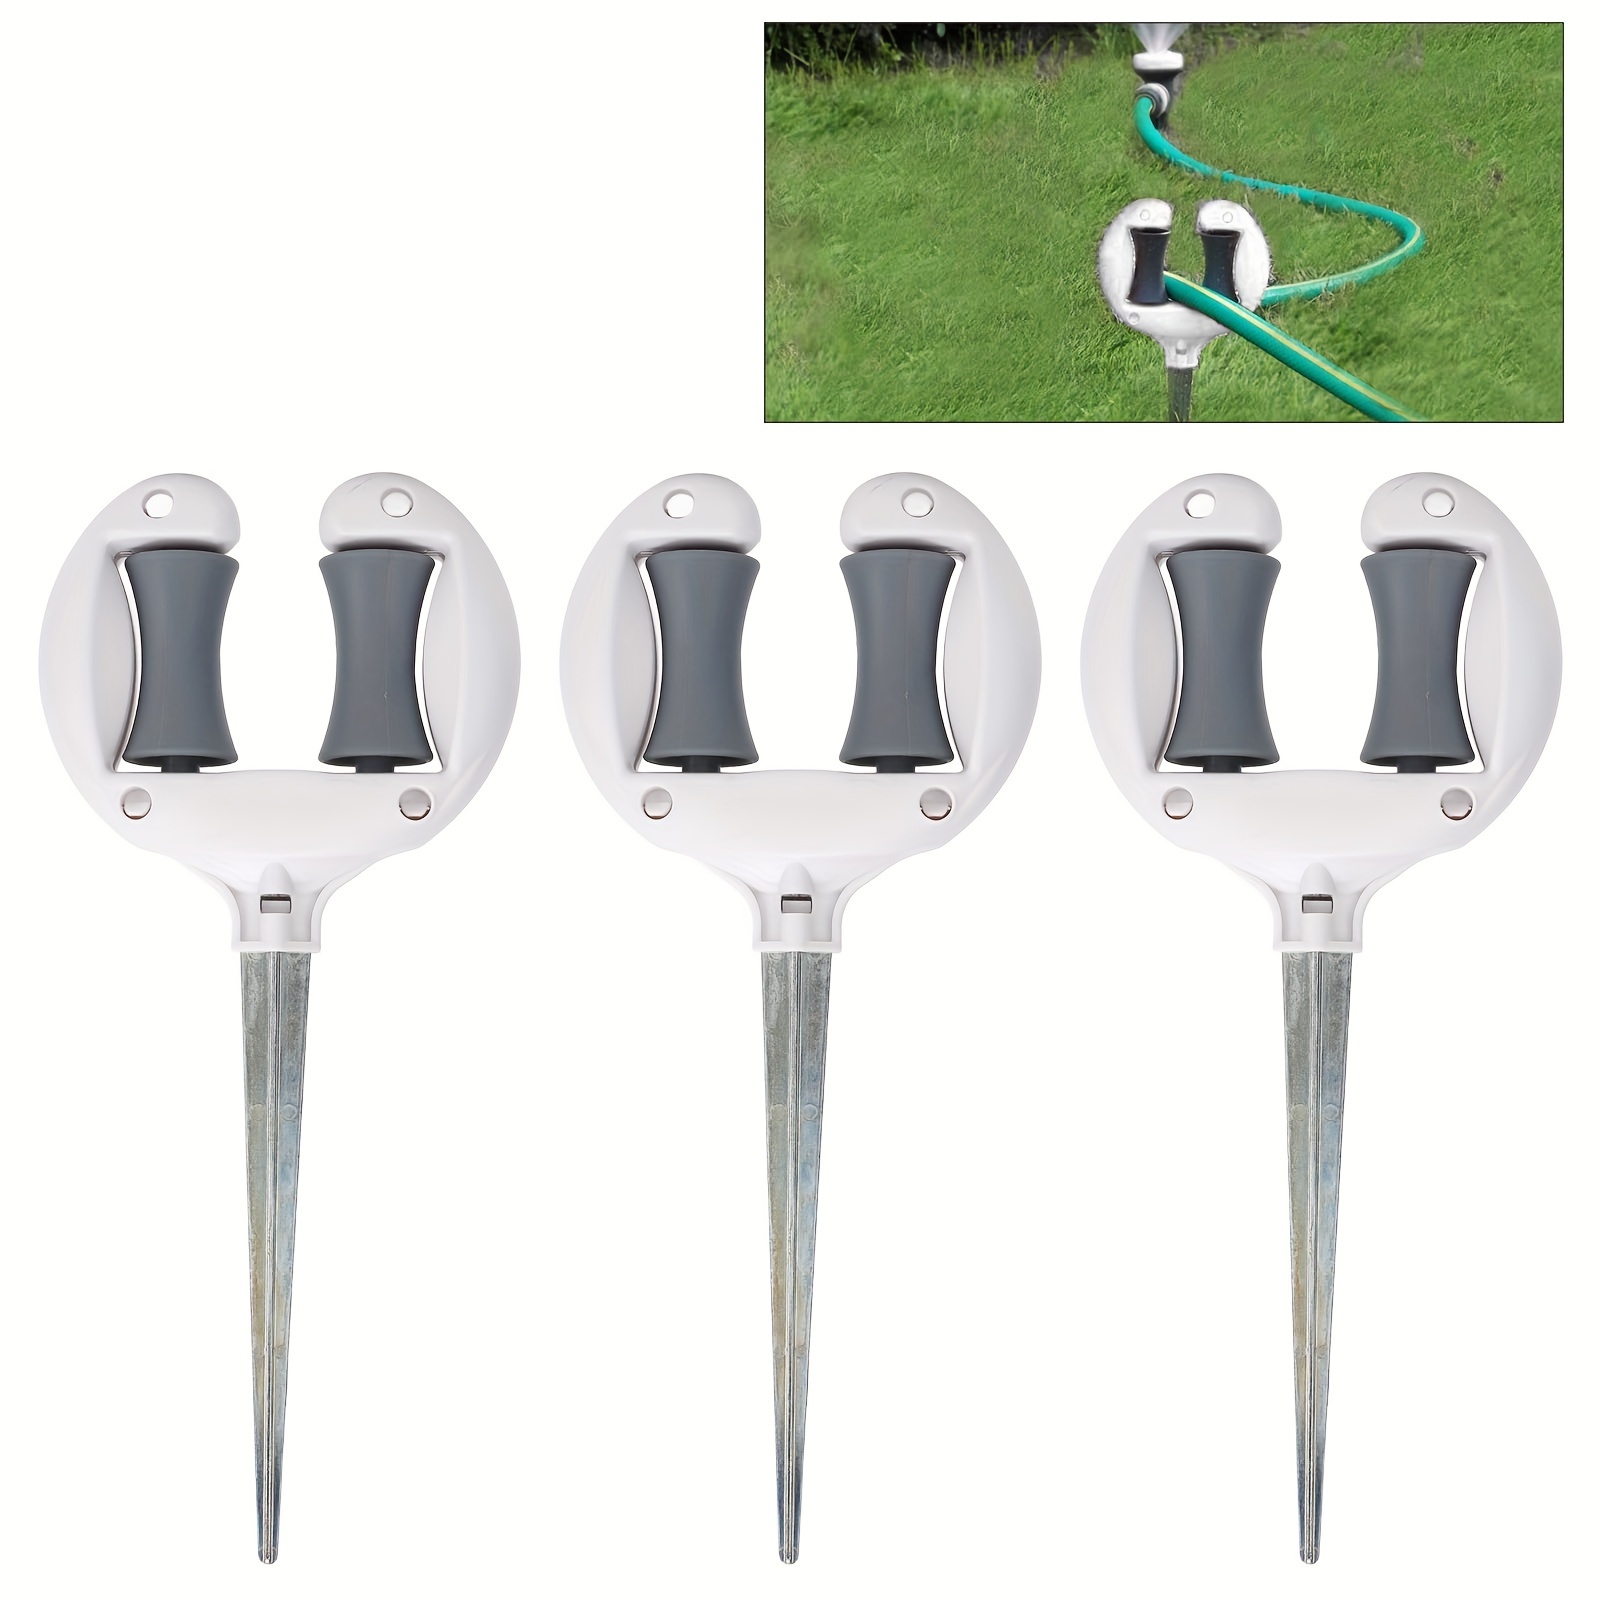 

Durable Garden Hose Guide With Swivel Roller - Abs & Iron Construction, Easy Installation For Lawn And Flower Bed Protection